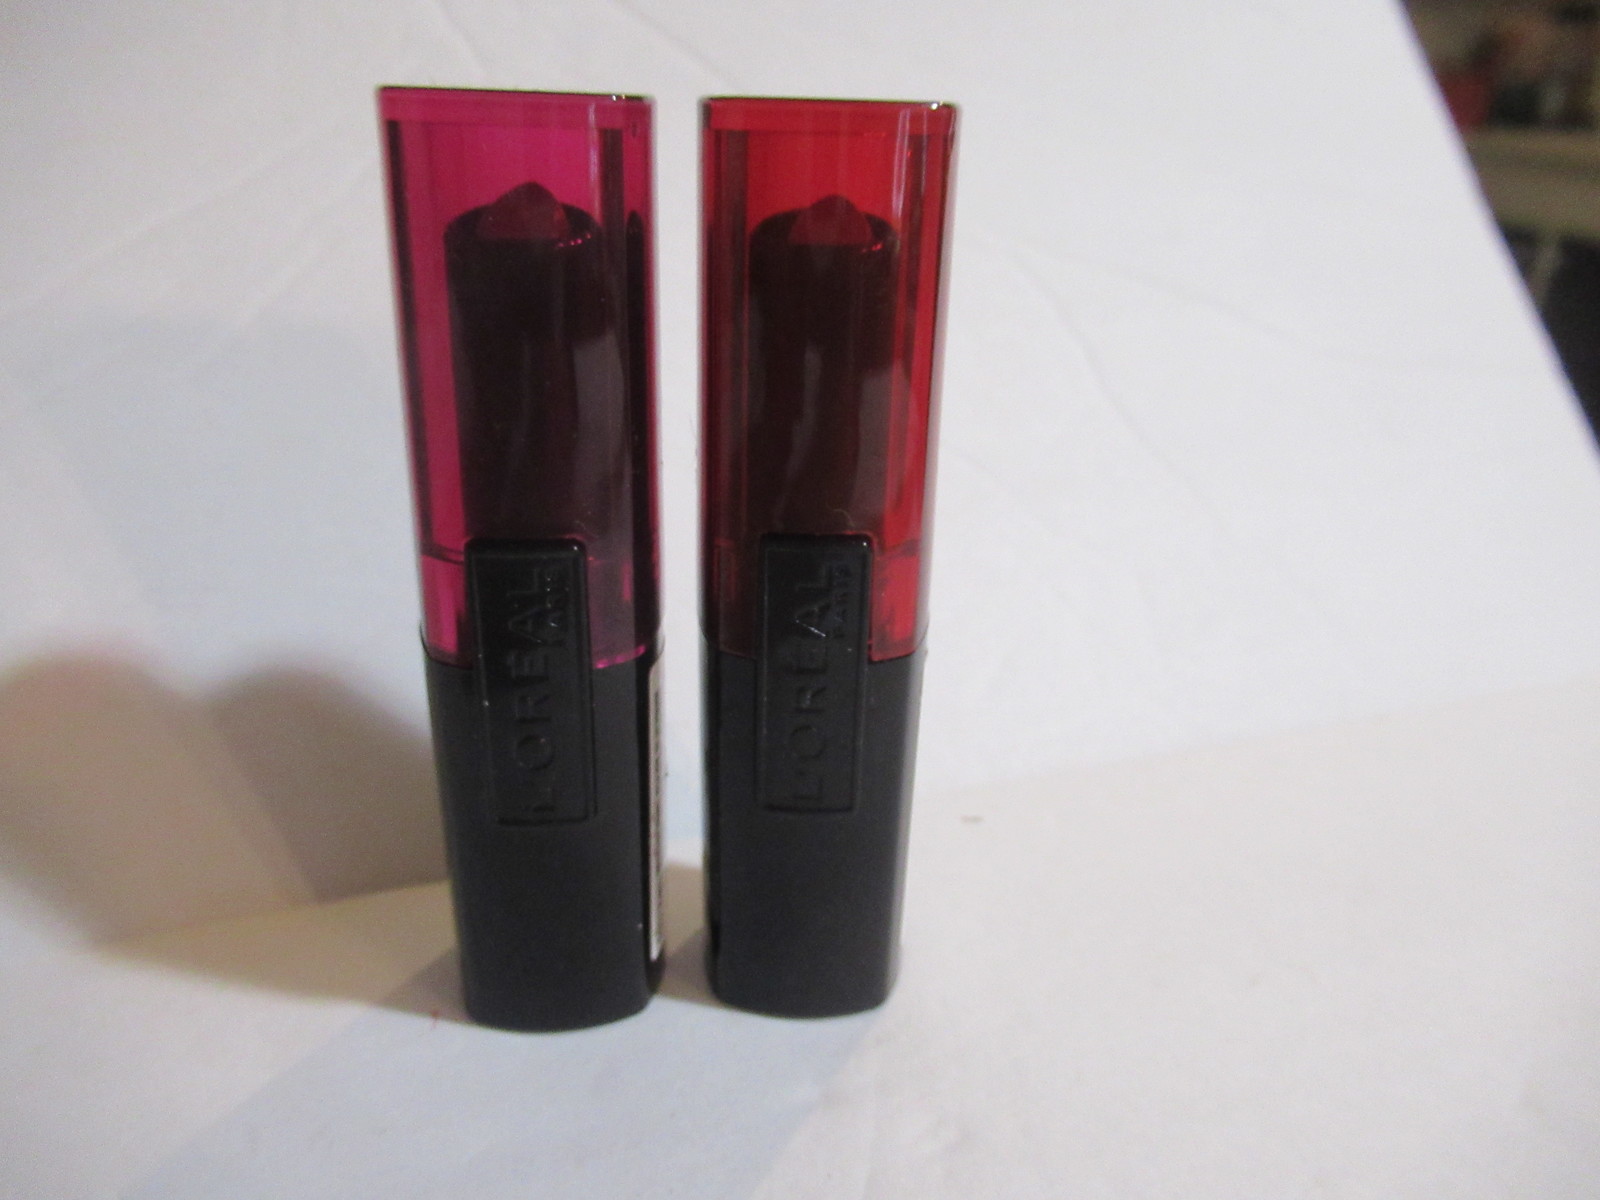 Primary image for L'Oreal Infallible Lipstick 712 Everlasting Plum + 337 Refined Ruby